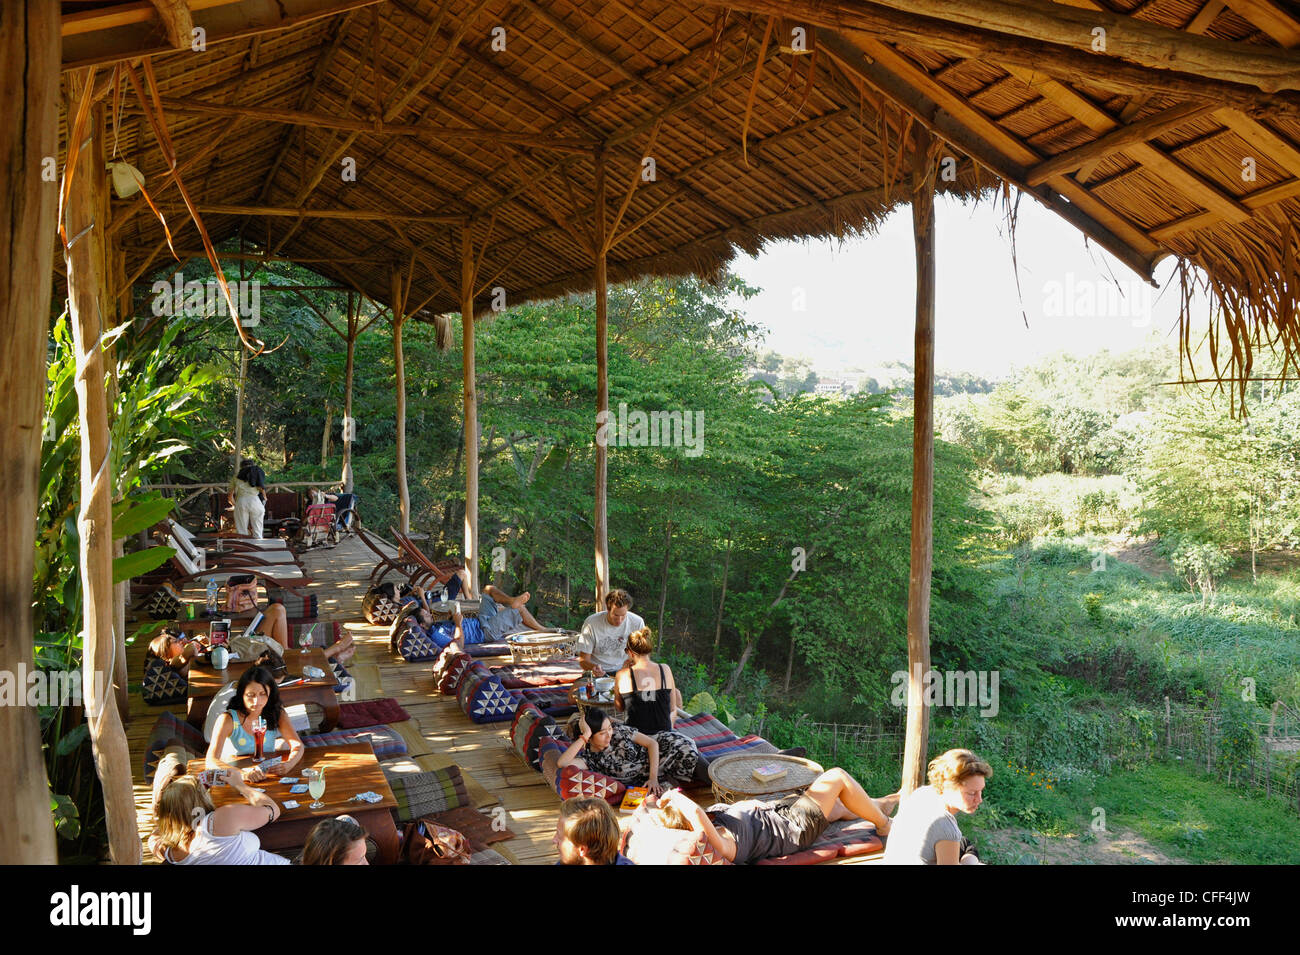 Travellers relaxing at reataurant terrace under palm roof, Nam Khan river, tributary to Mekong river, Luang Prabang, Laos Stock Photo